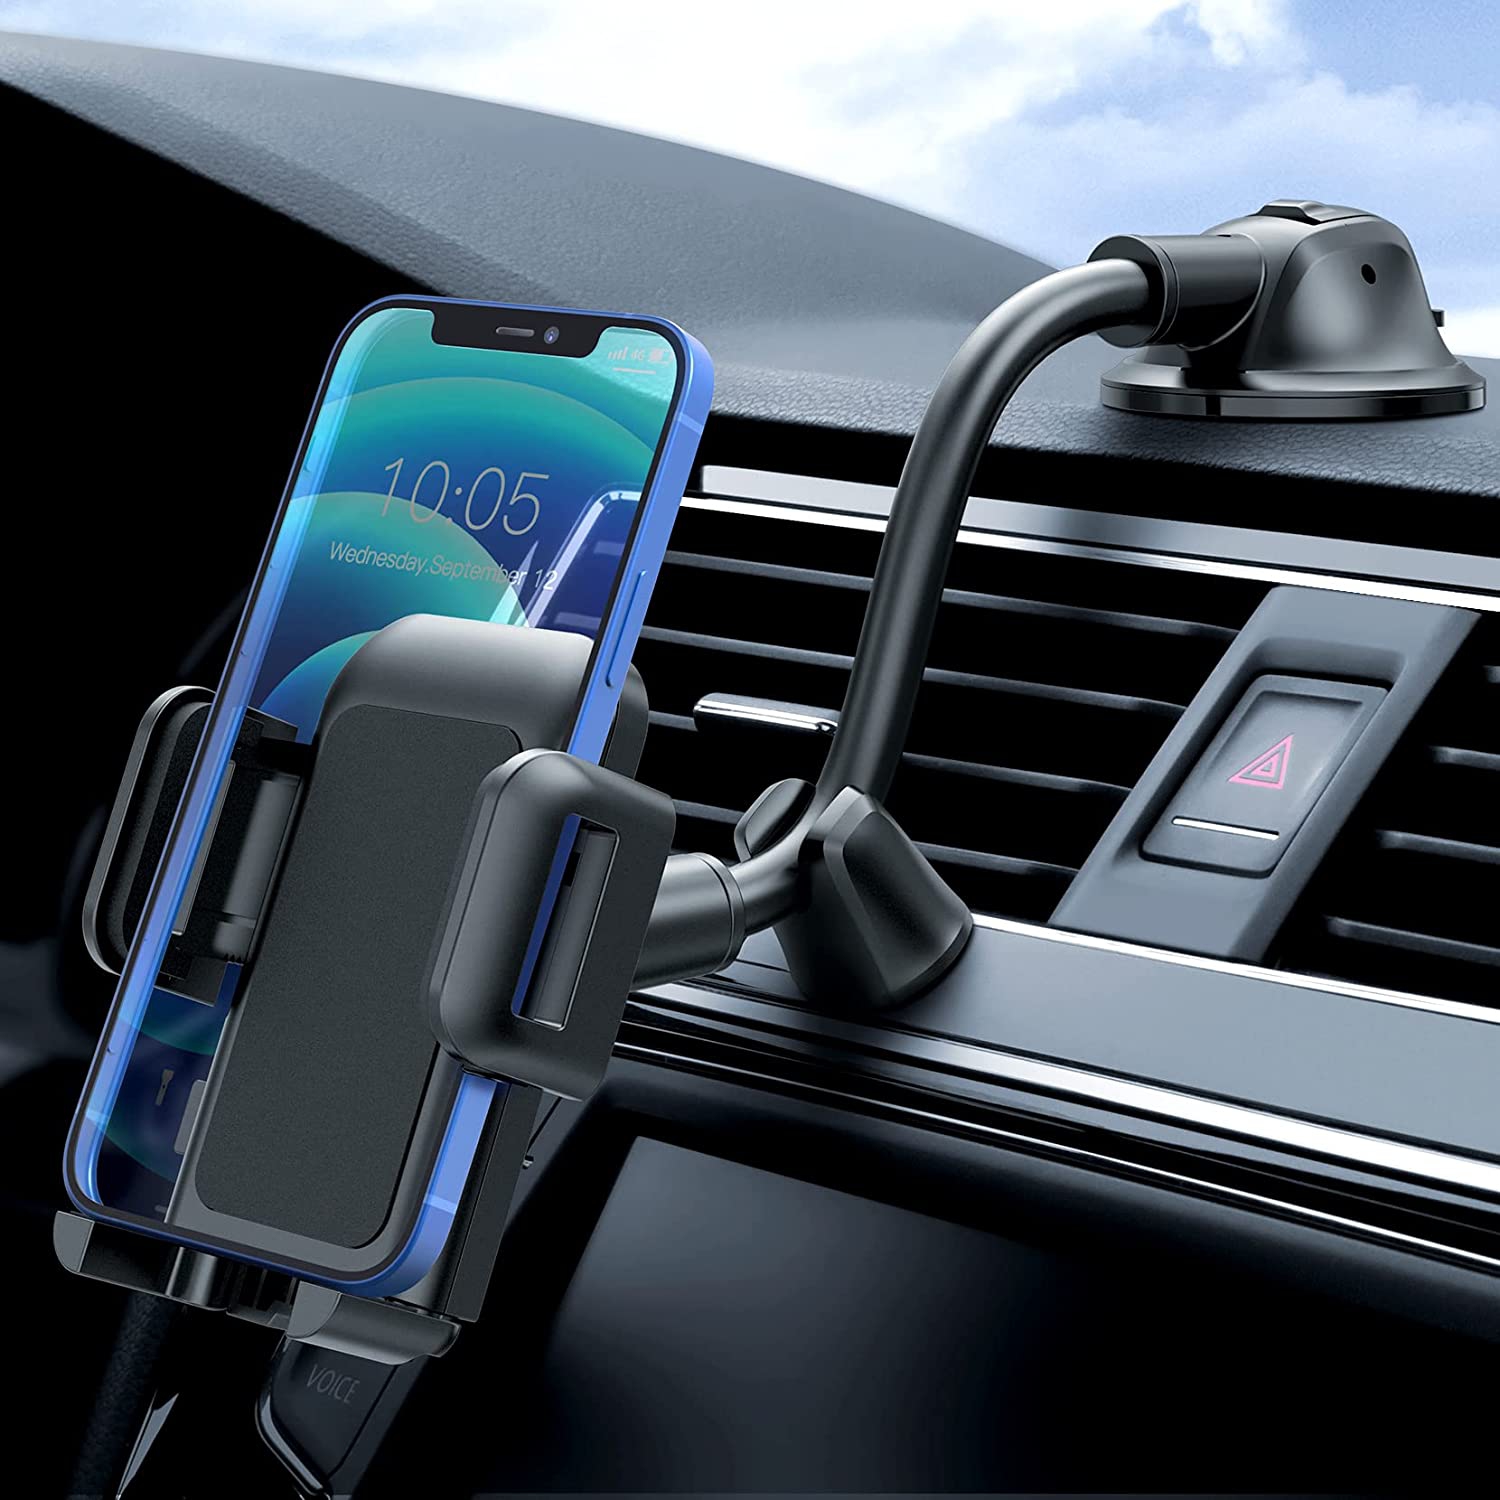 Car Phone Holder Mount, Long Arm Dashboard Whindshield Phone Holder with Anti-Shake Device, Strong Suction Cup Car Mount Compatible with iPhone 13 12 11 Pro Max XS XR, Galaxy Note